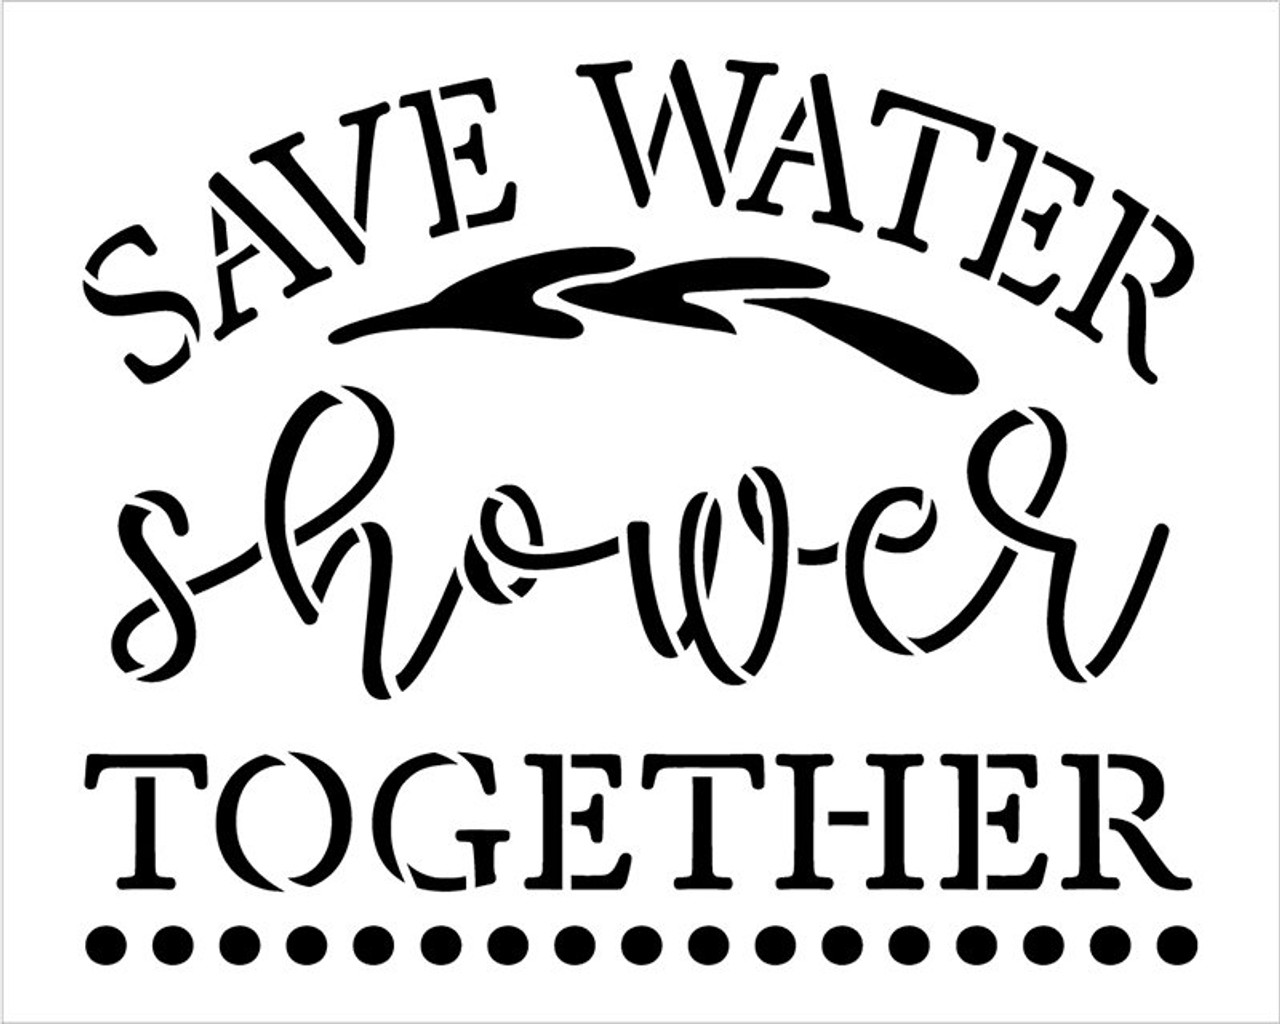 Save Water Shower Together Stencil by StudioR12 | DIY Master Bathroom Home Decor | Craft & Paint Funny Wood Sign for Spouses - Partners | Select Size